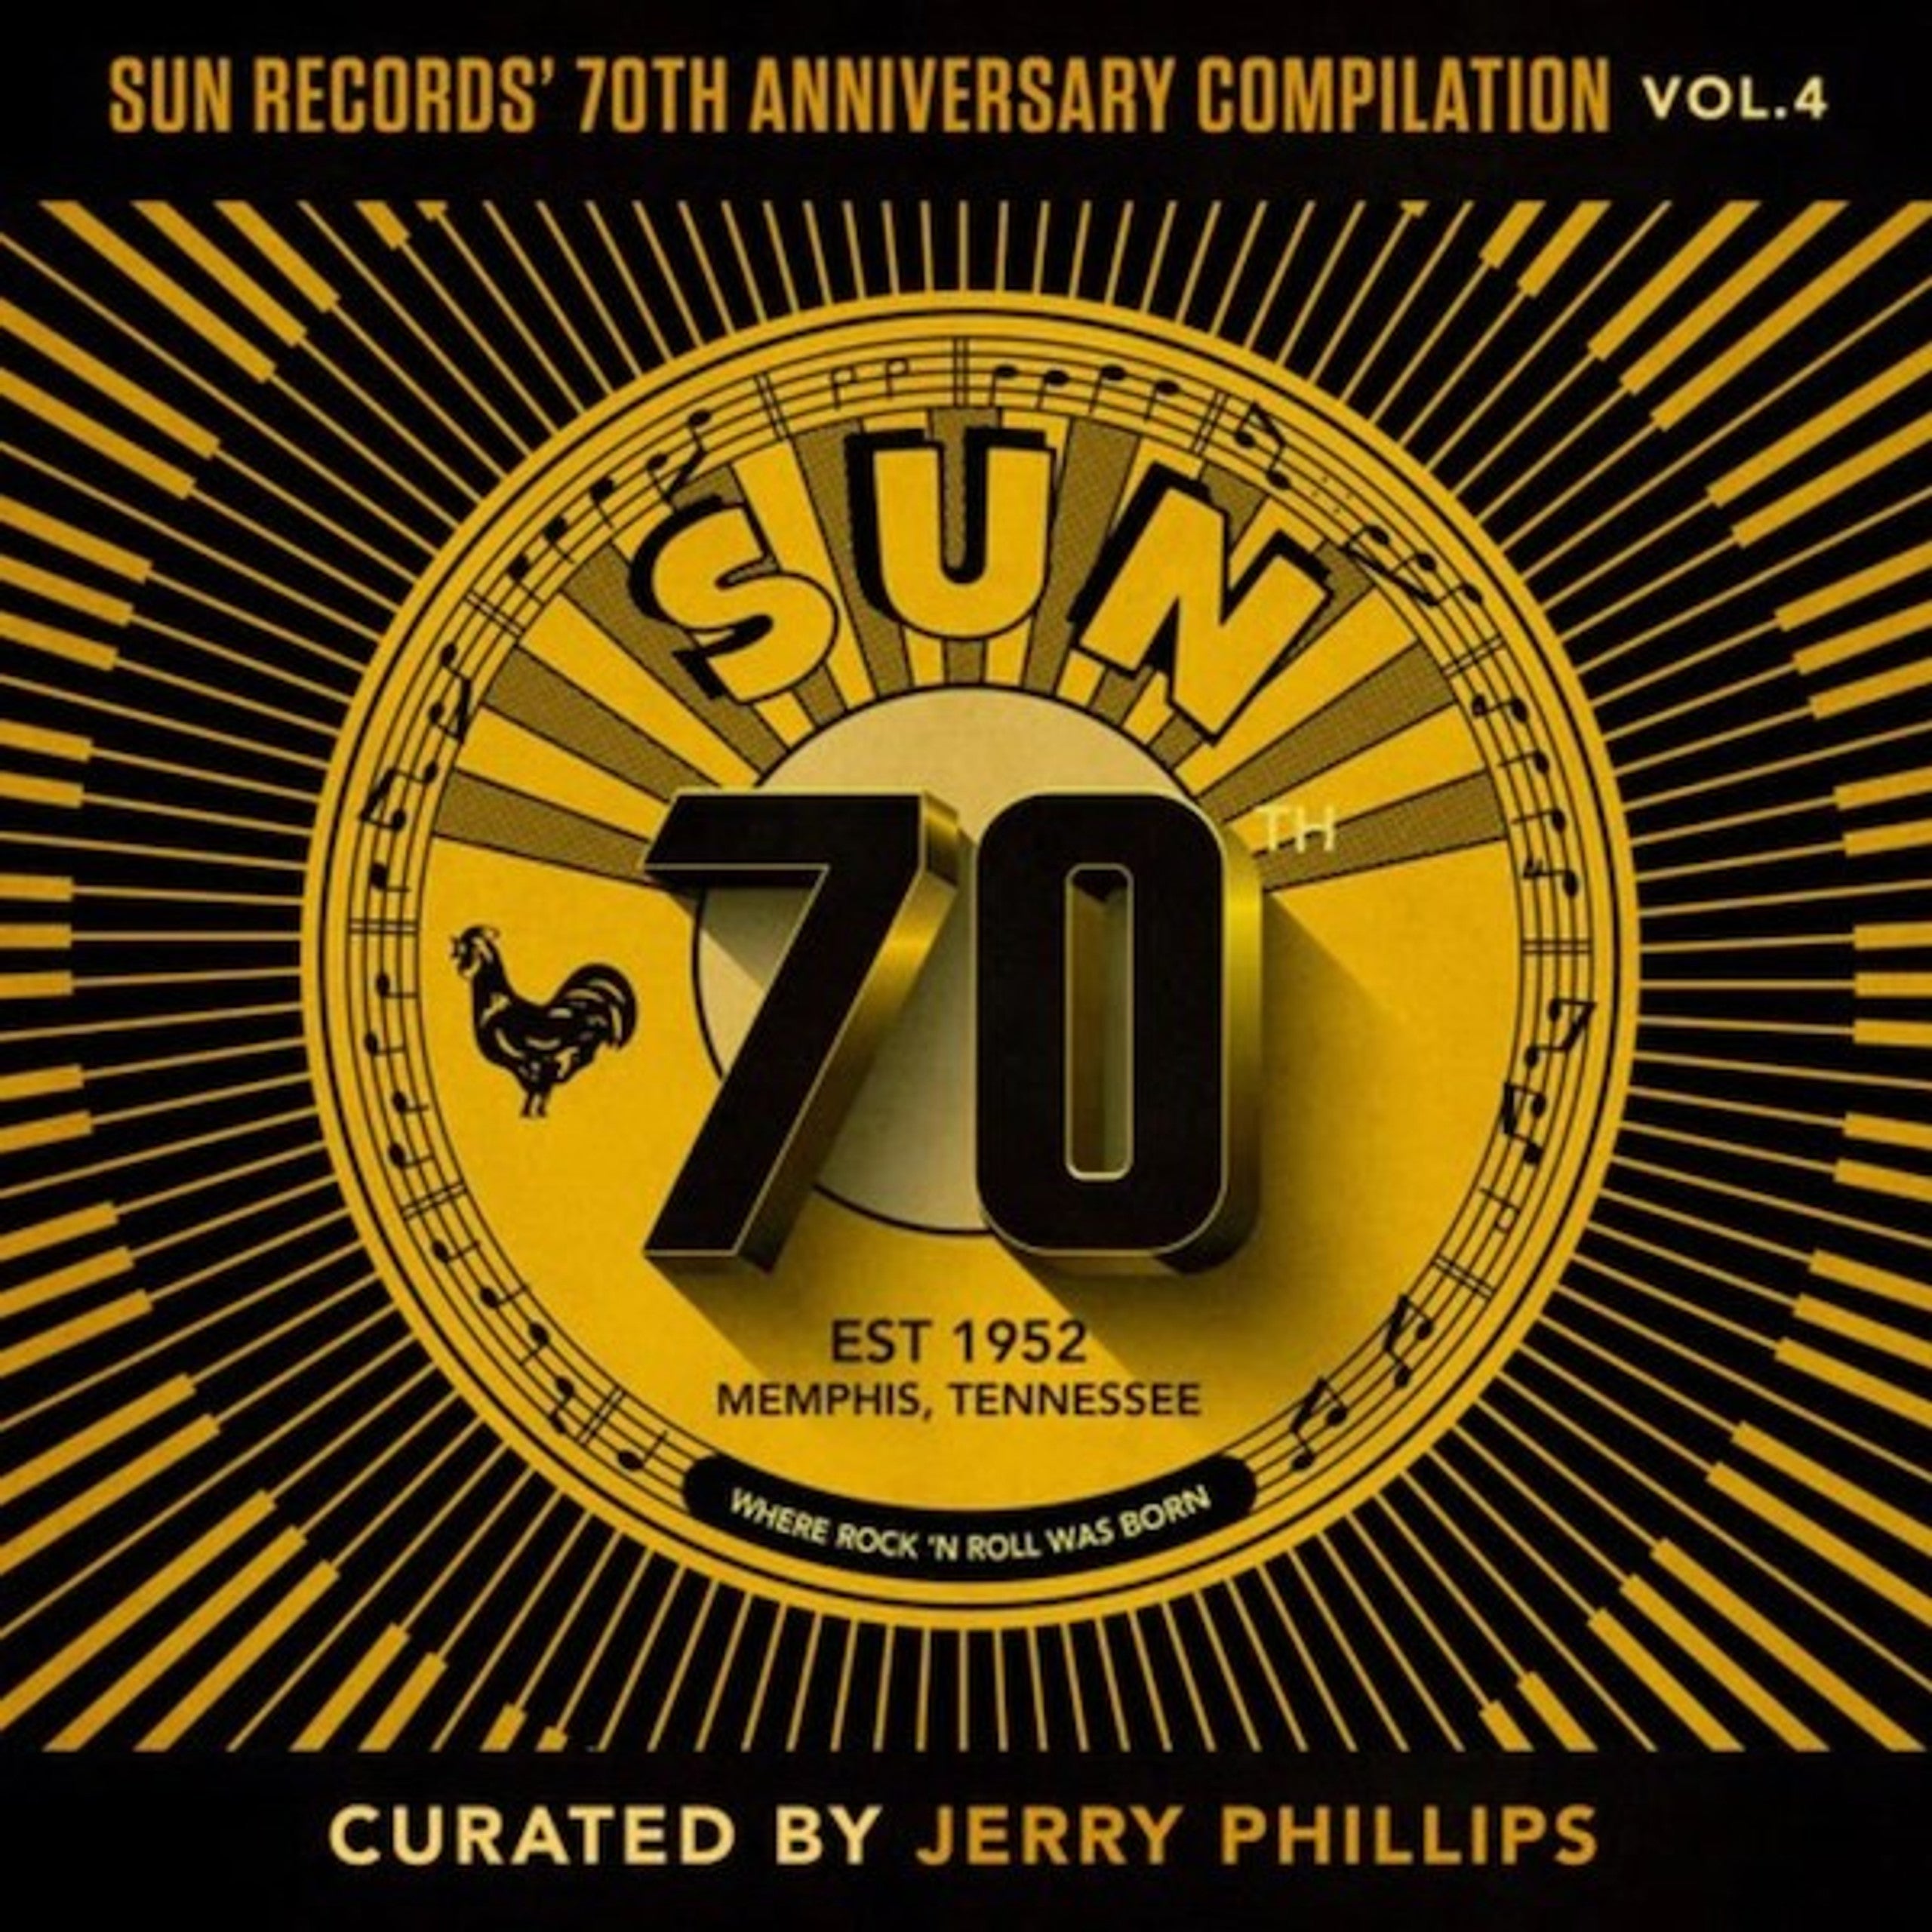 VARIOUS ARTISTS 'SUN RECORDS' 70TH ANNIVERSARY COMPILATION, VOL. 4' LP